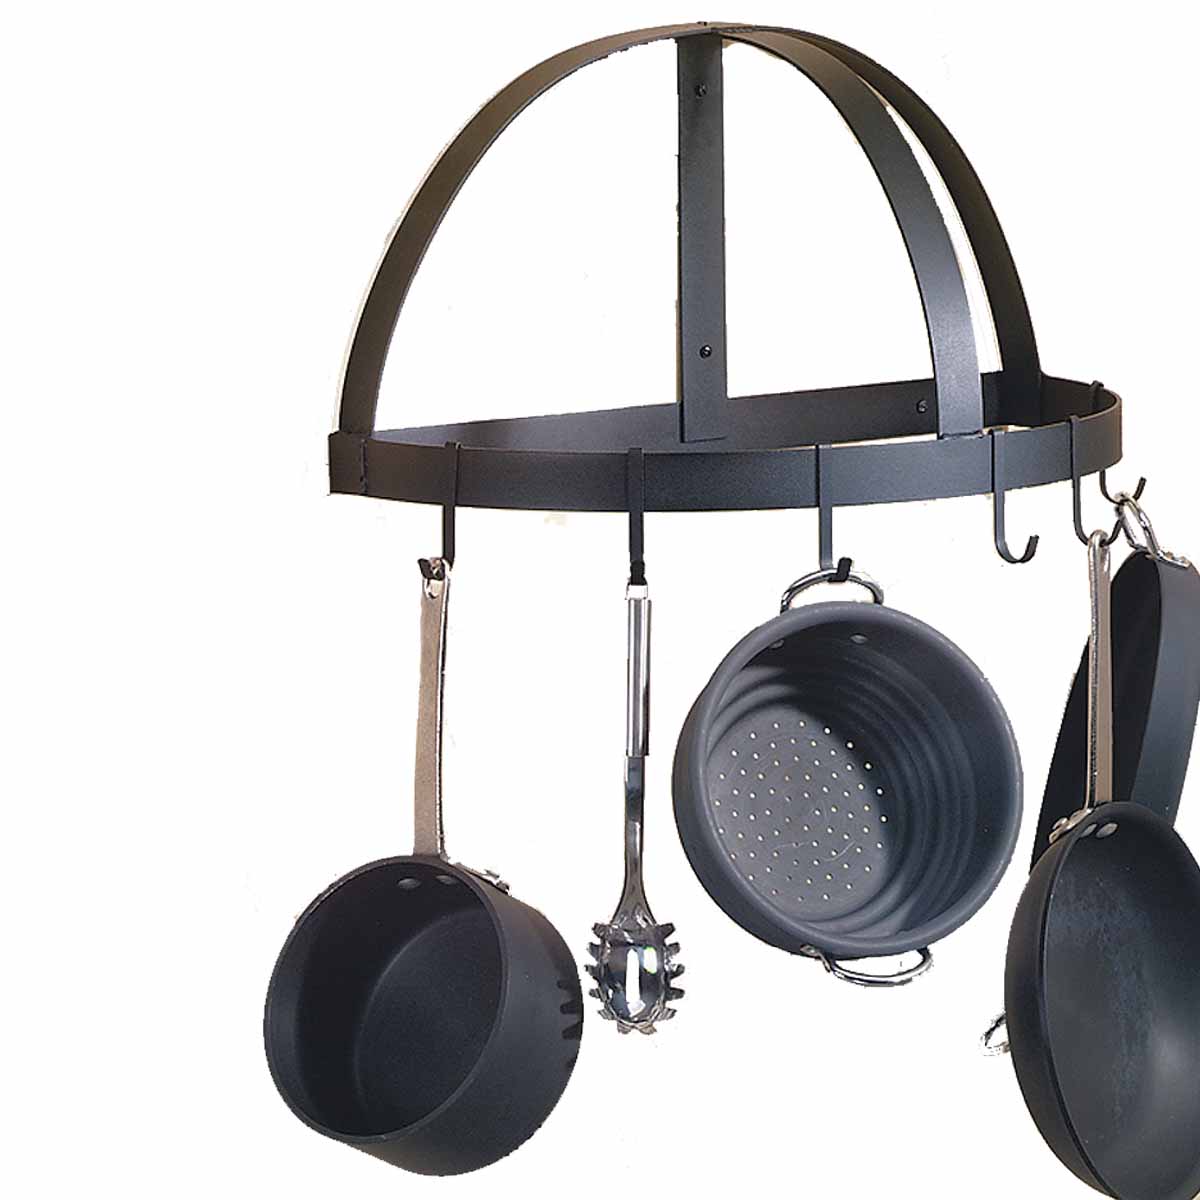 https://wroughtworks.com/images/wrought-iron/wrought-iron-pot-rack-wall-mounted.jpg